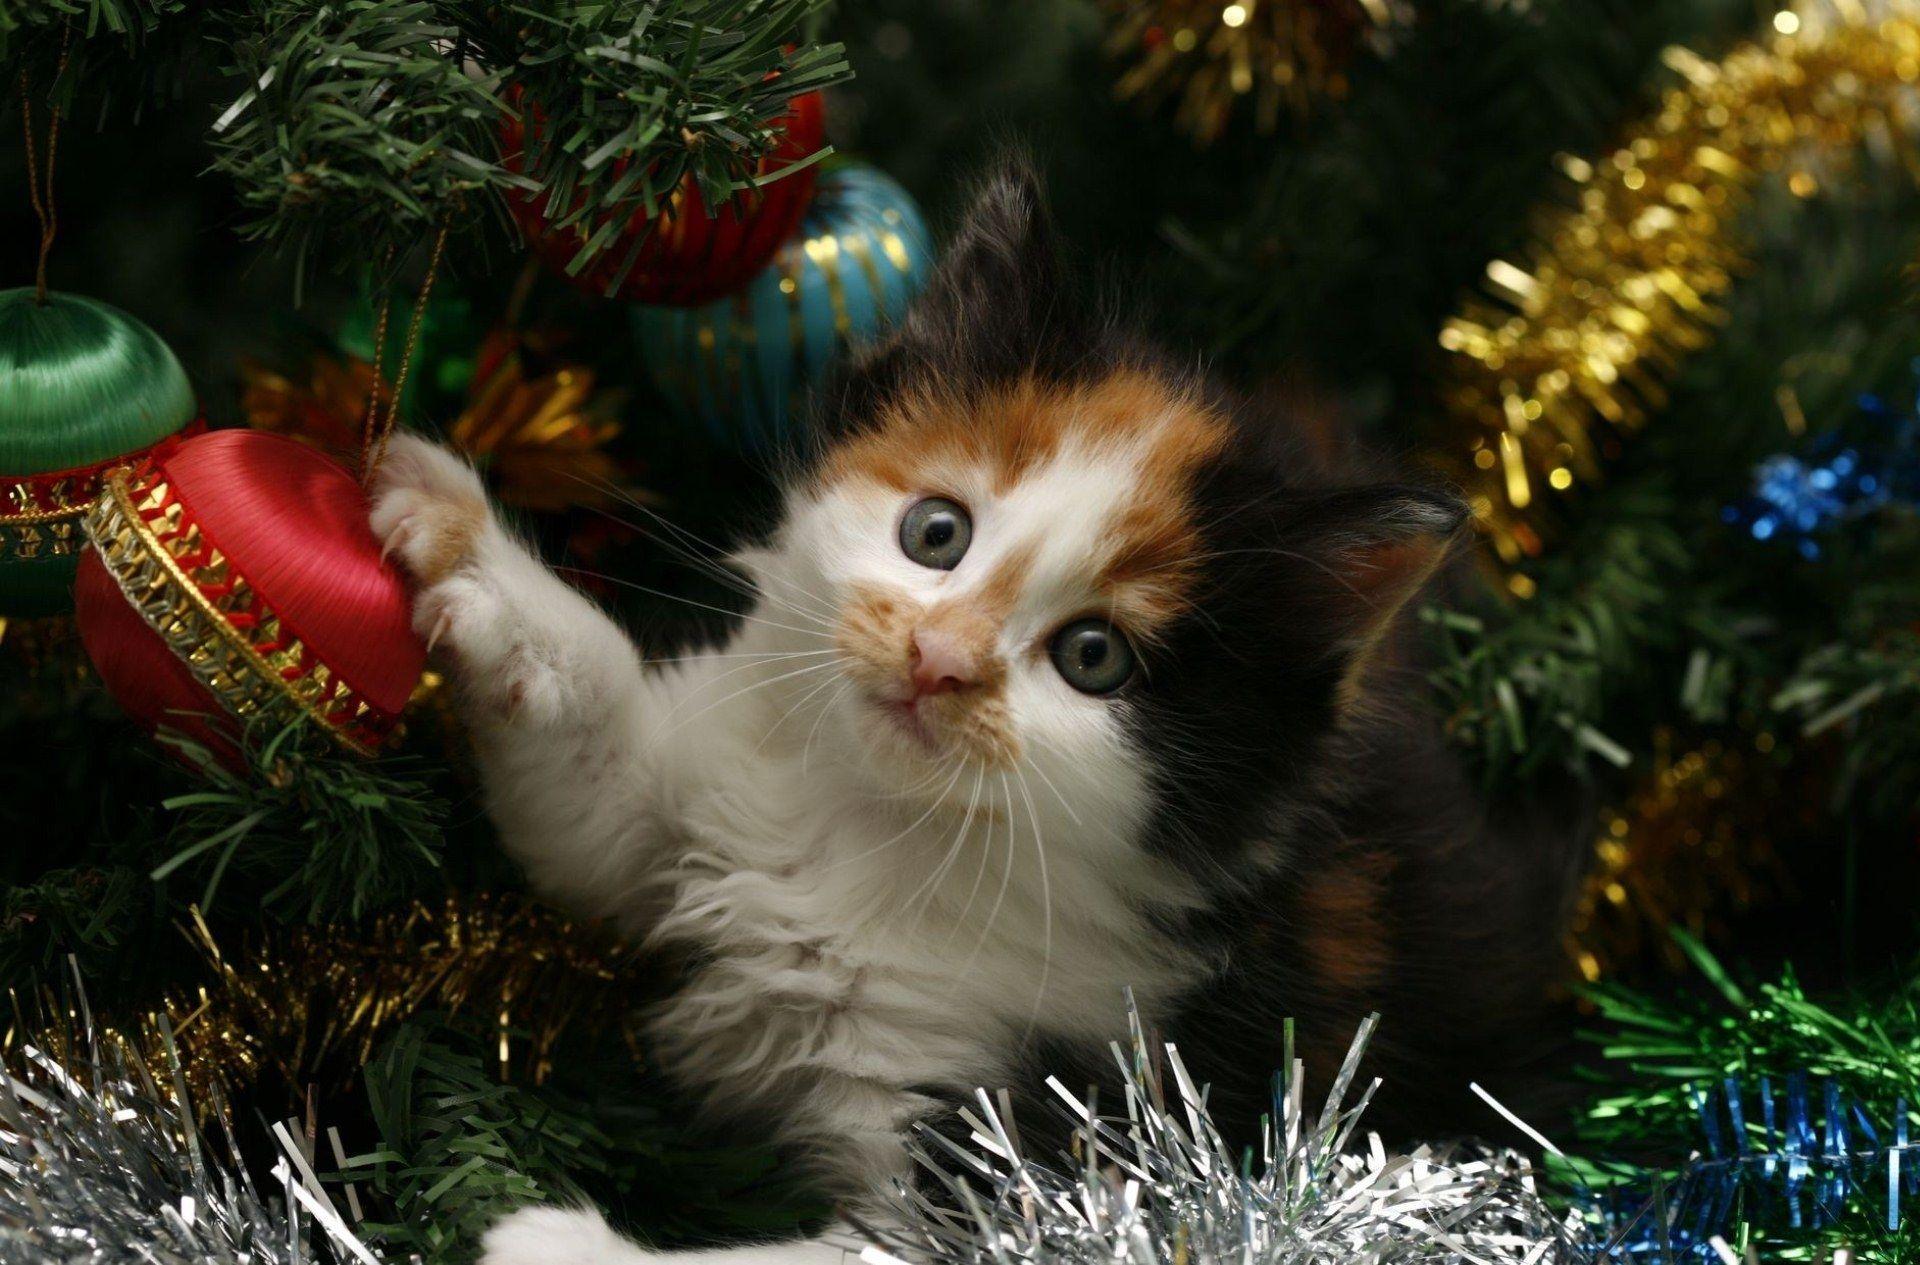 Have A Jolly Christmaskitten Proofing The Christmas Tree May 11